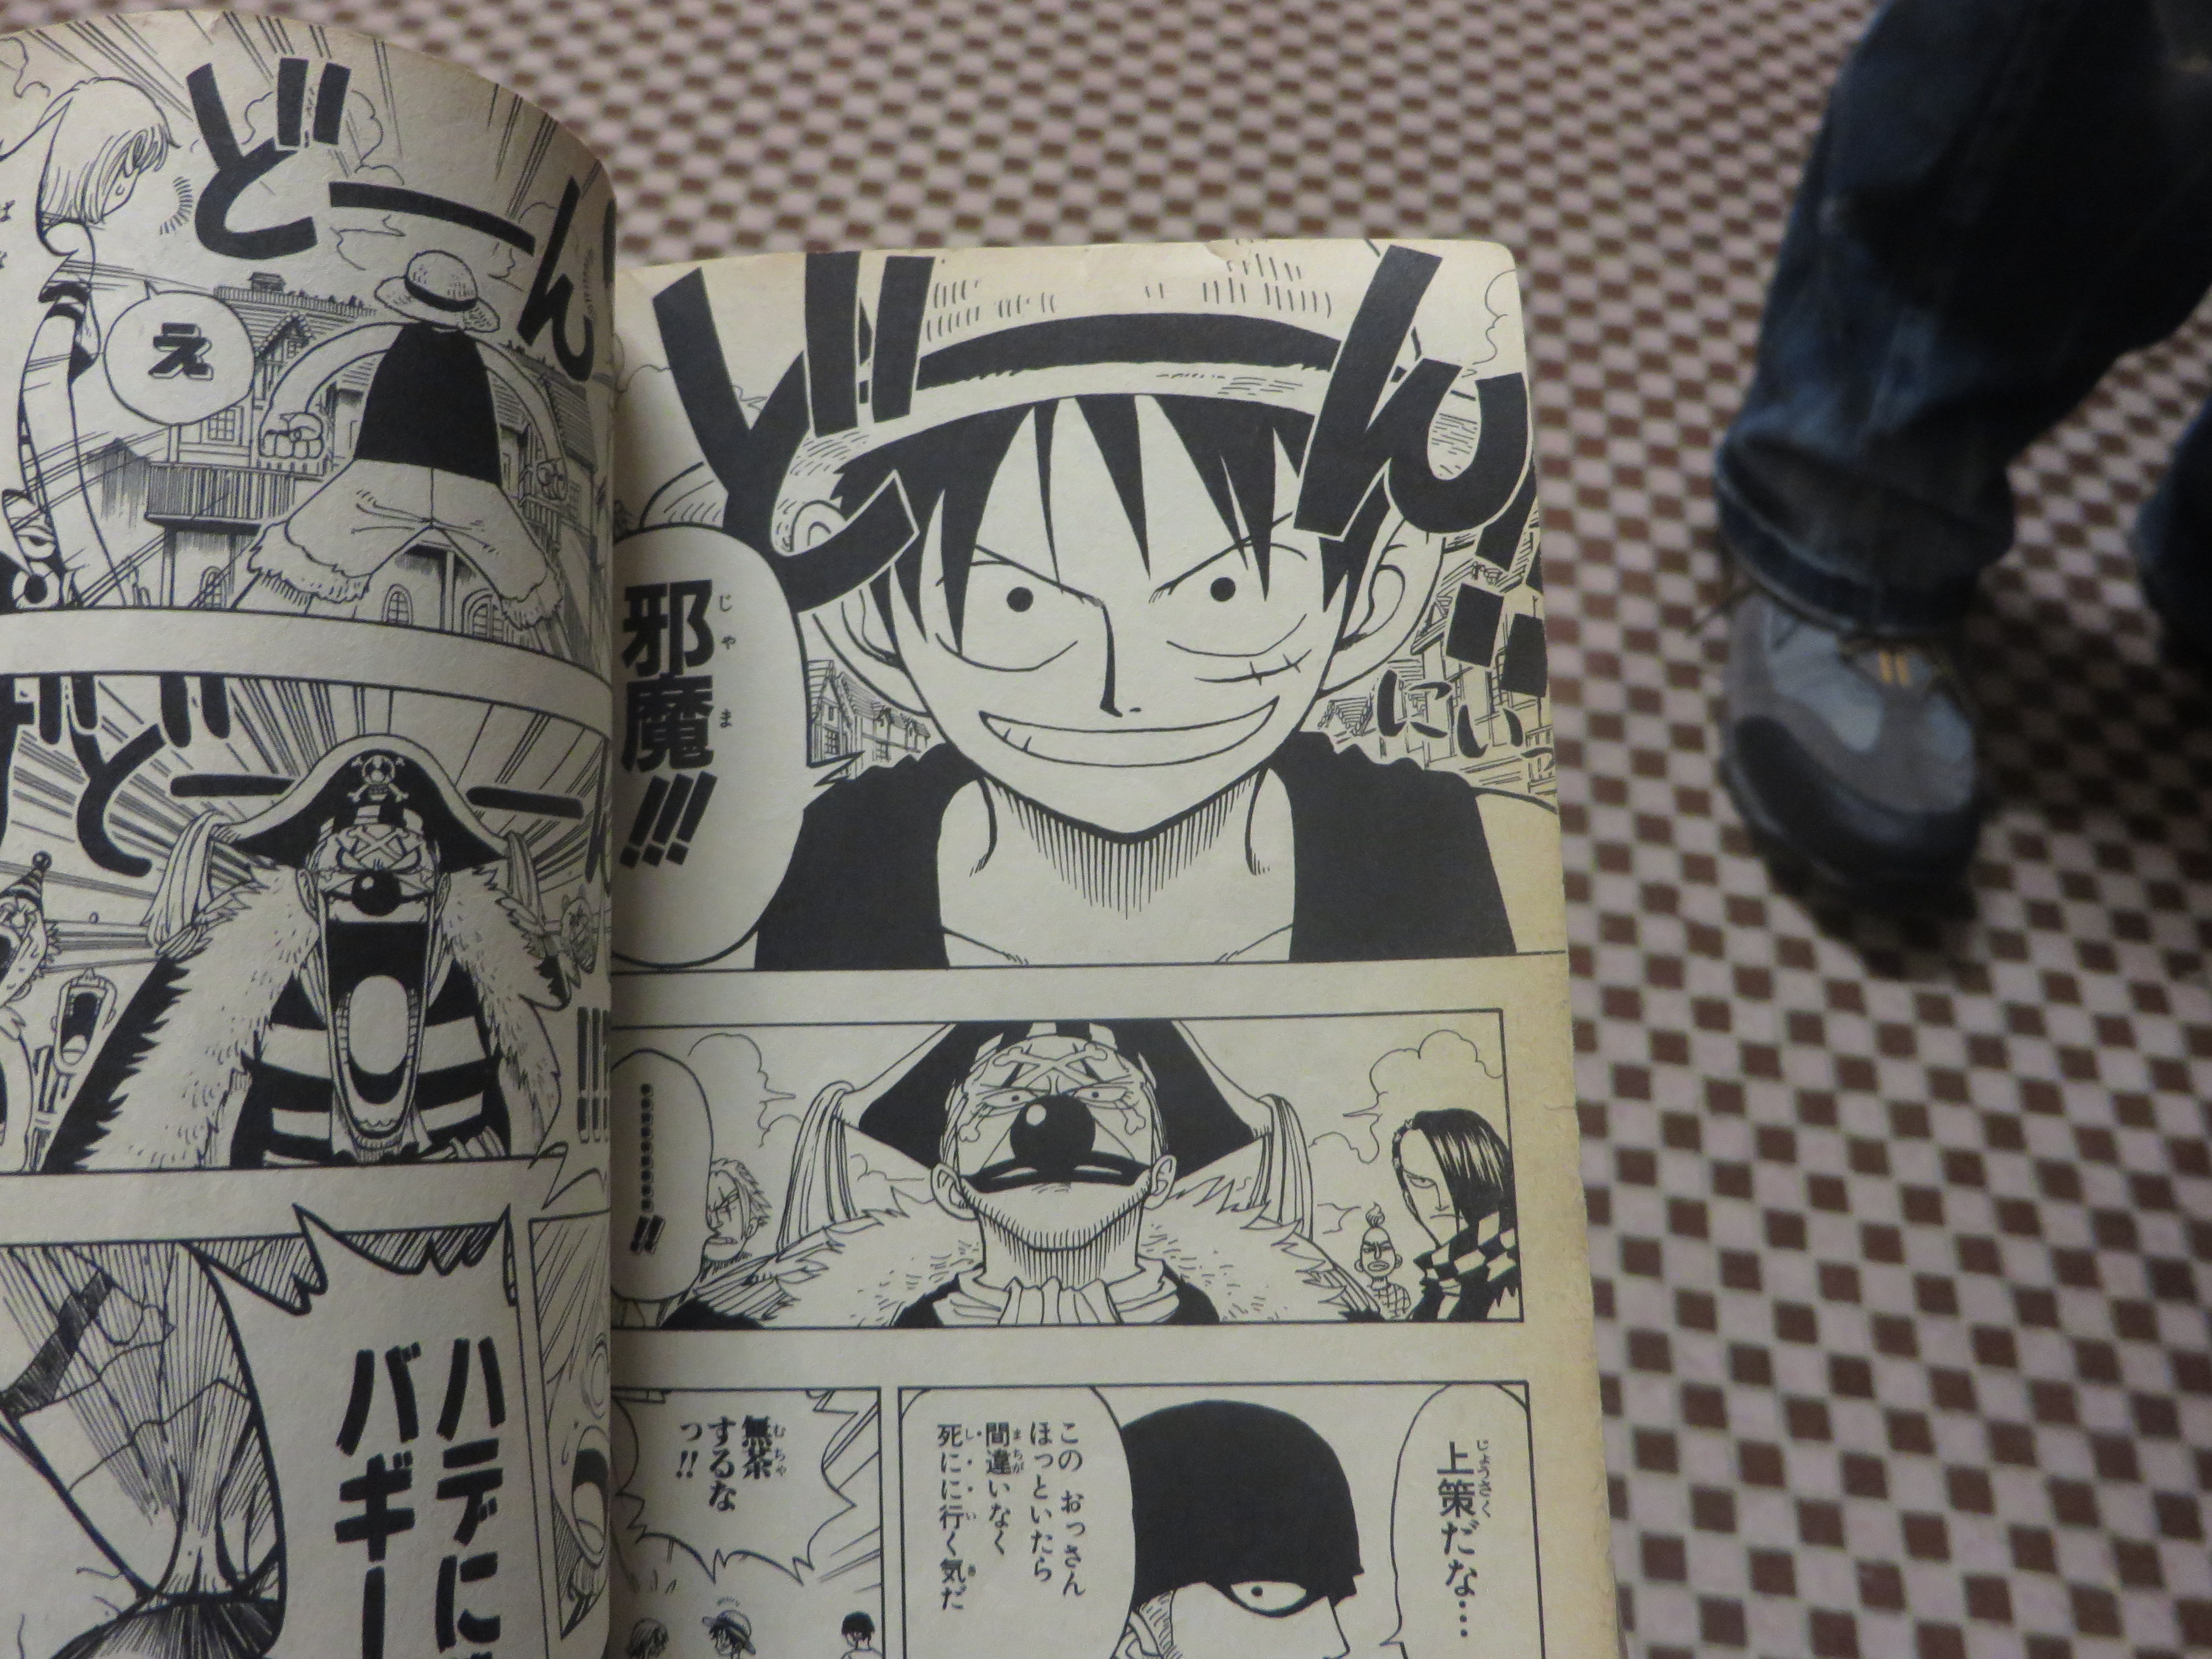 One Piece manga featuring Luffy and Buggy